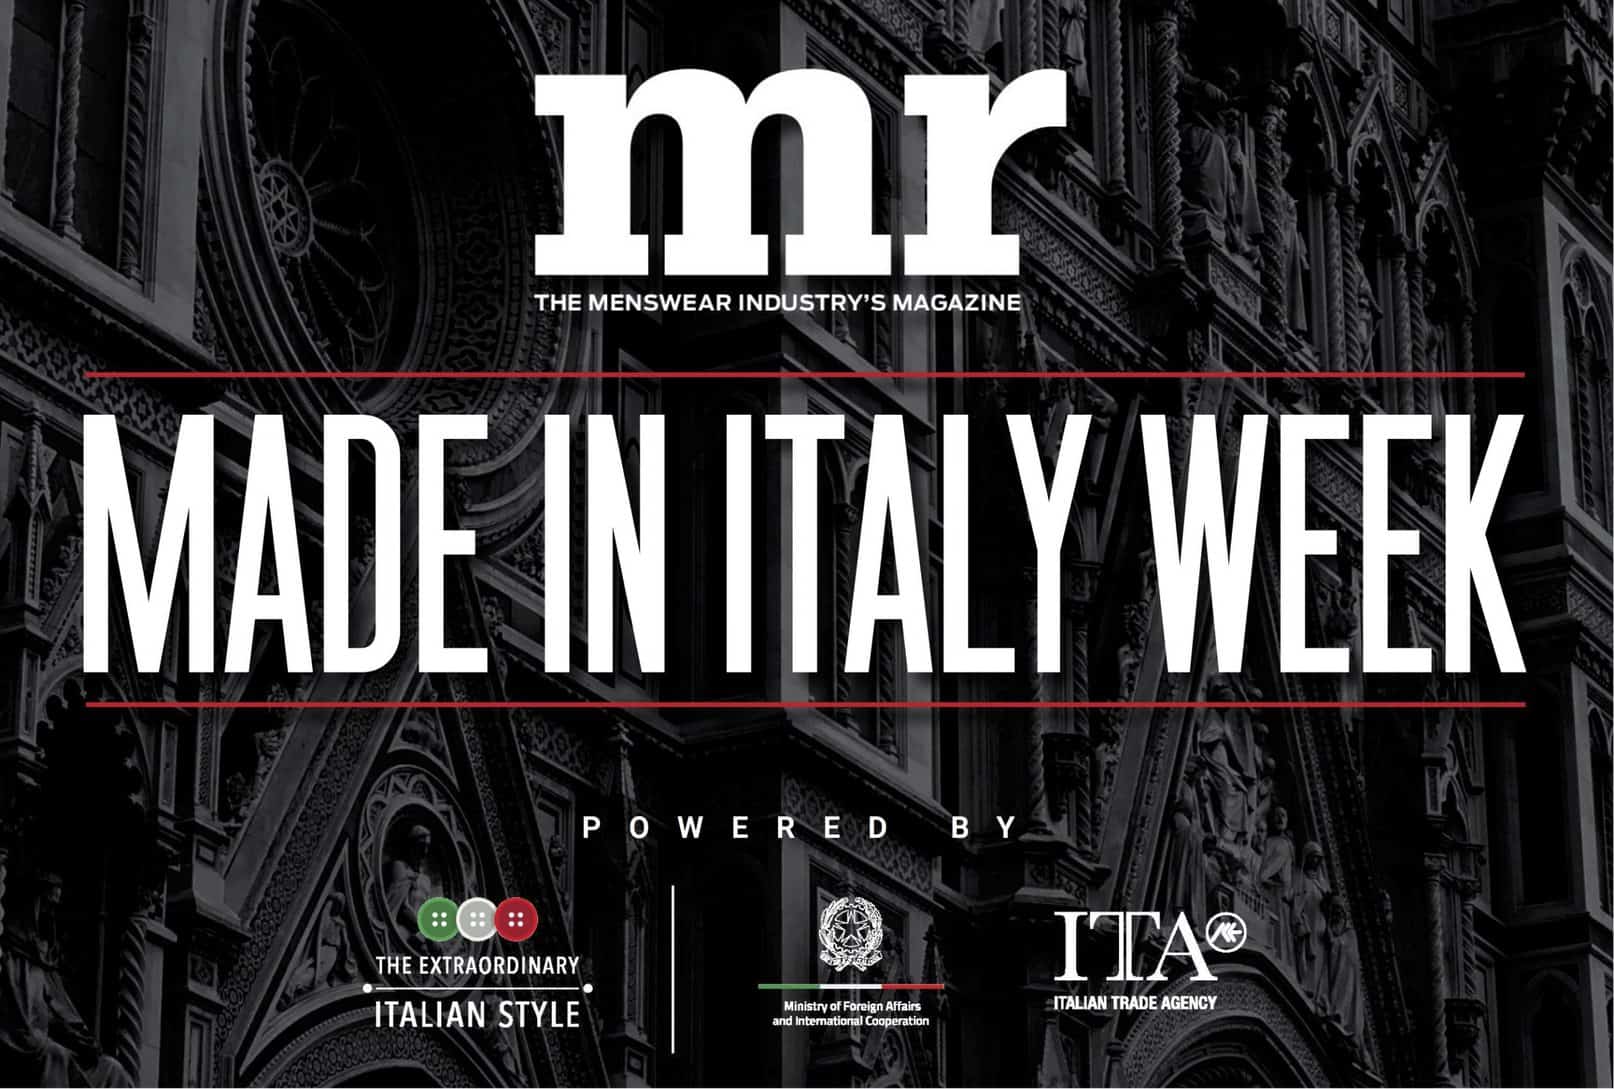 MADE-IN-ITALY WEEK, SPONSORED BY THE ITALIAN TRADE AGENCY - TREND ...